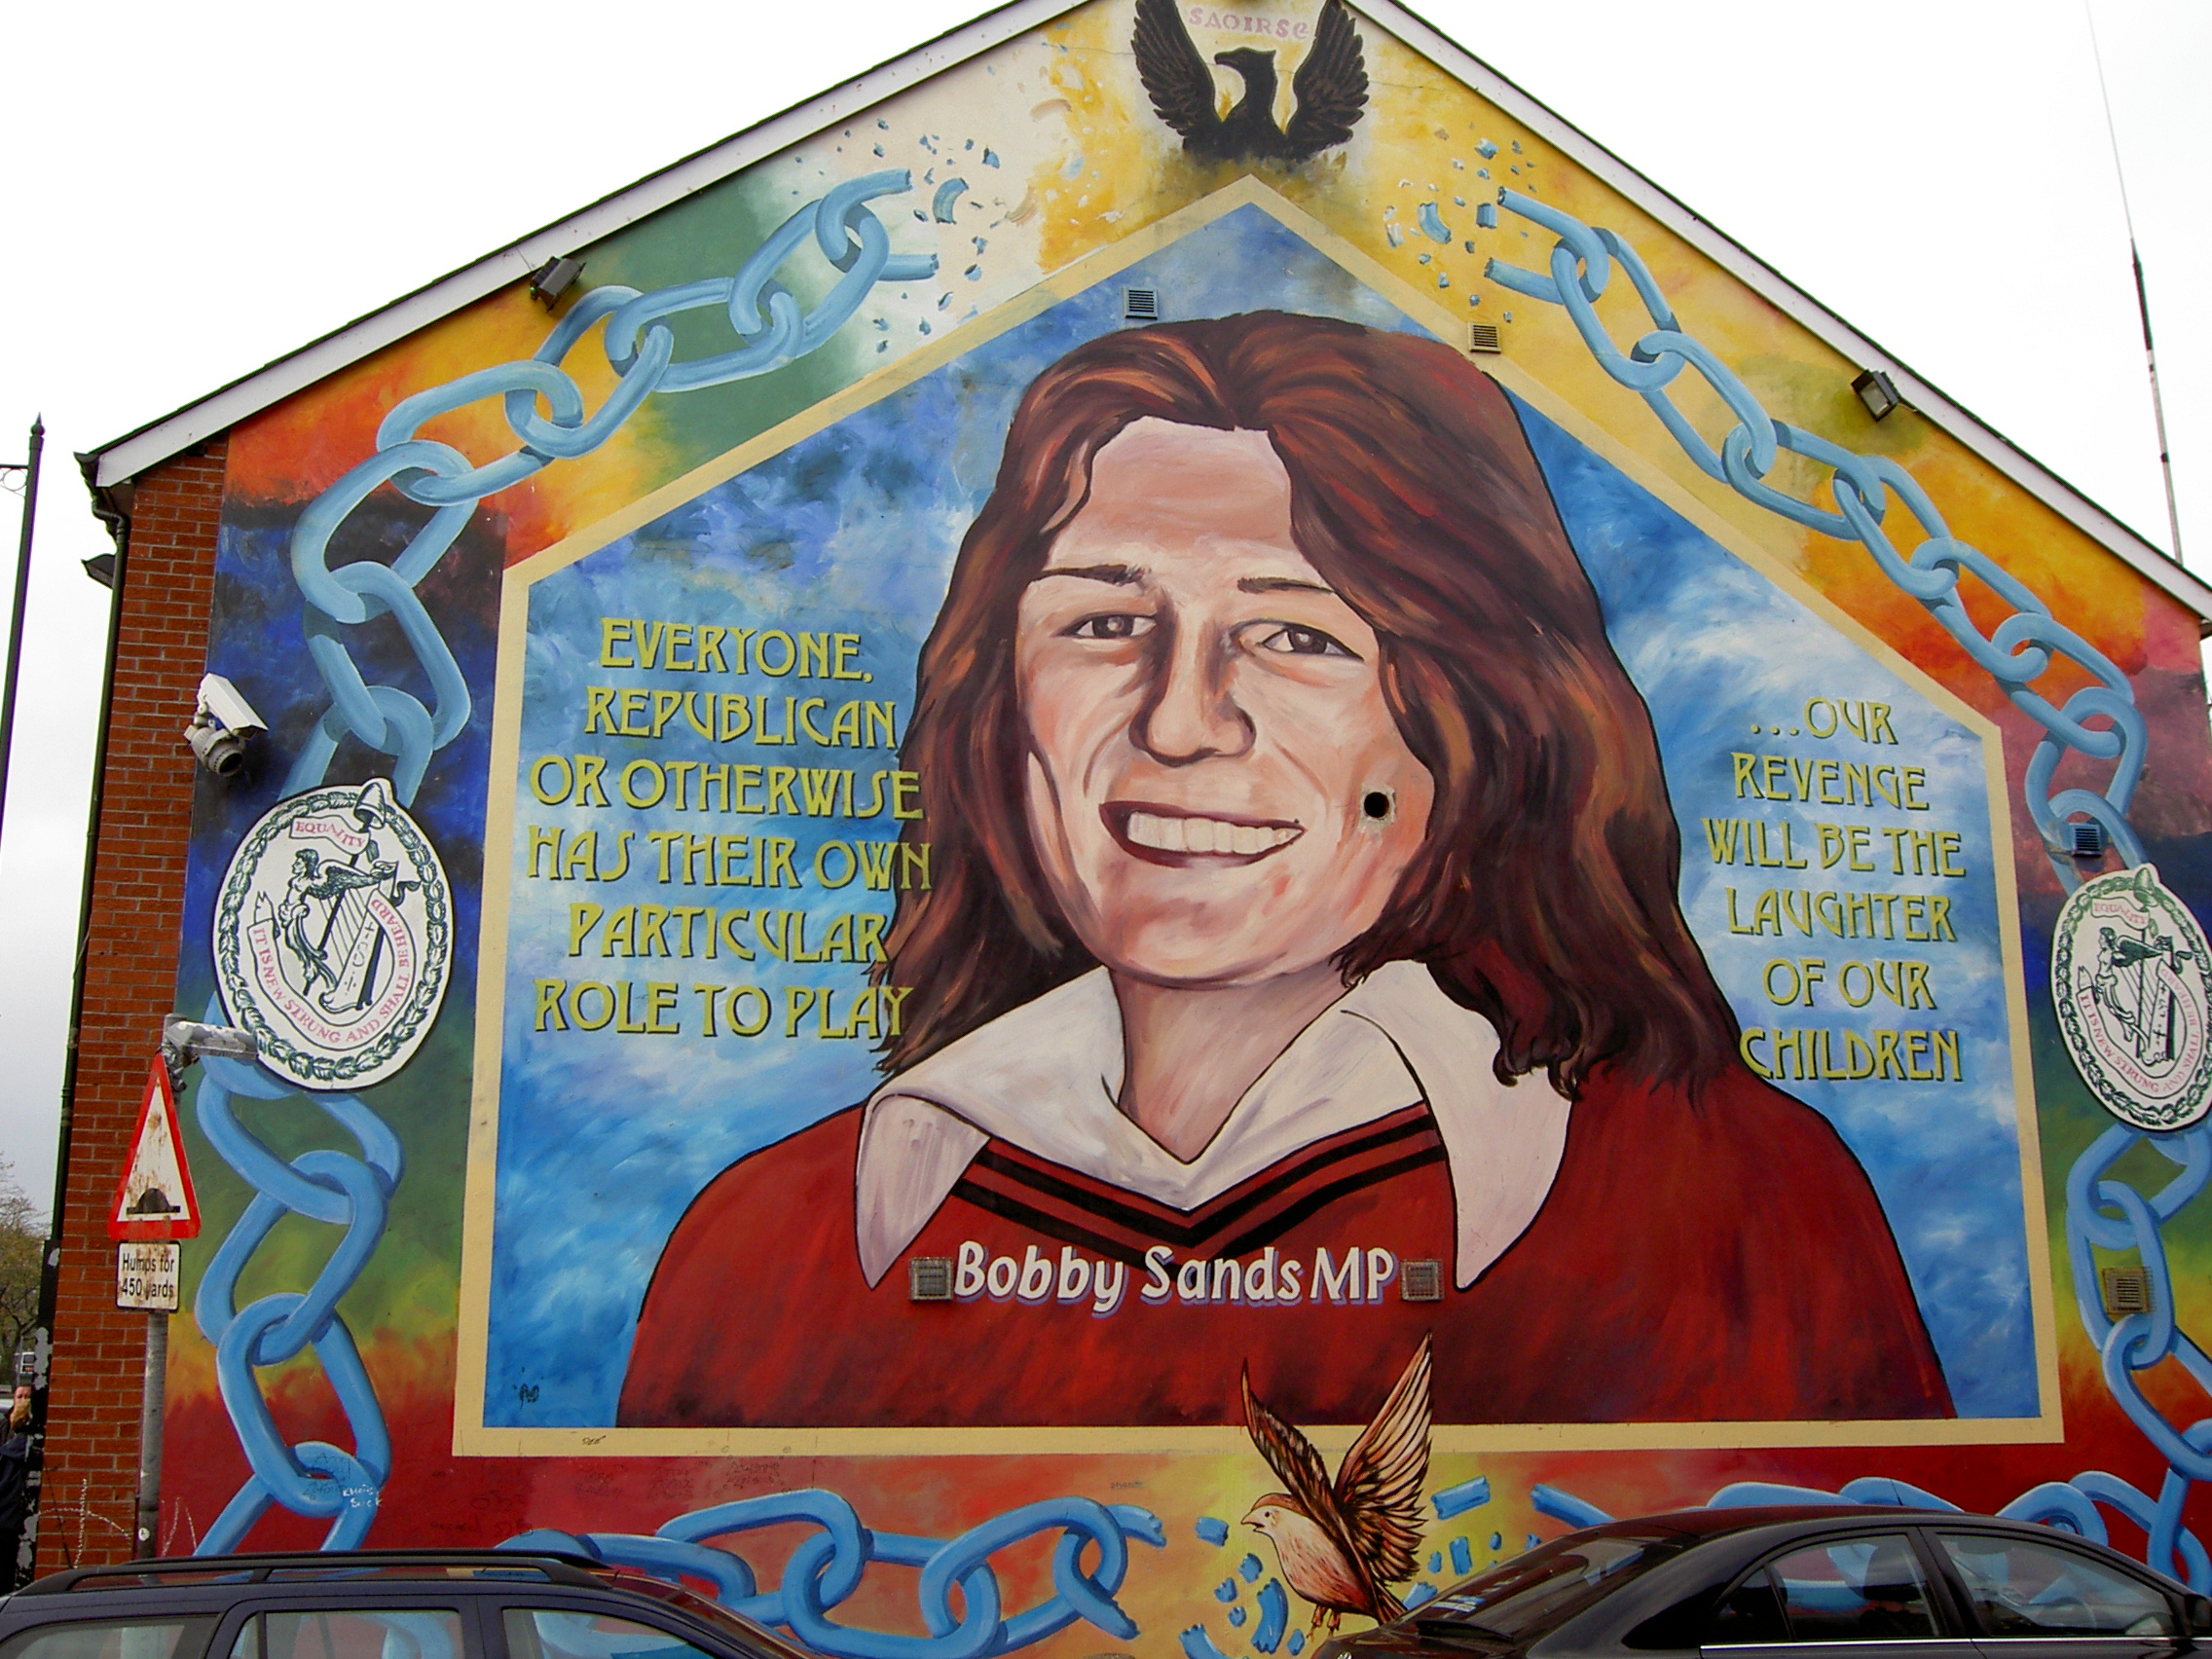 Bobby sands mural Image Shermozle wikimedia commons